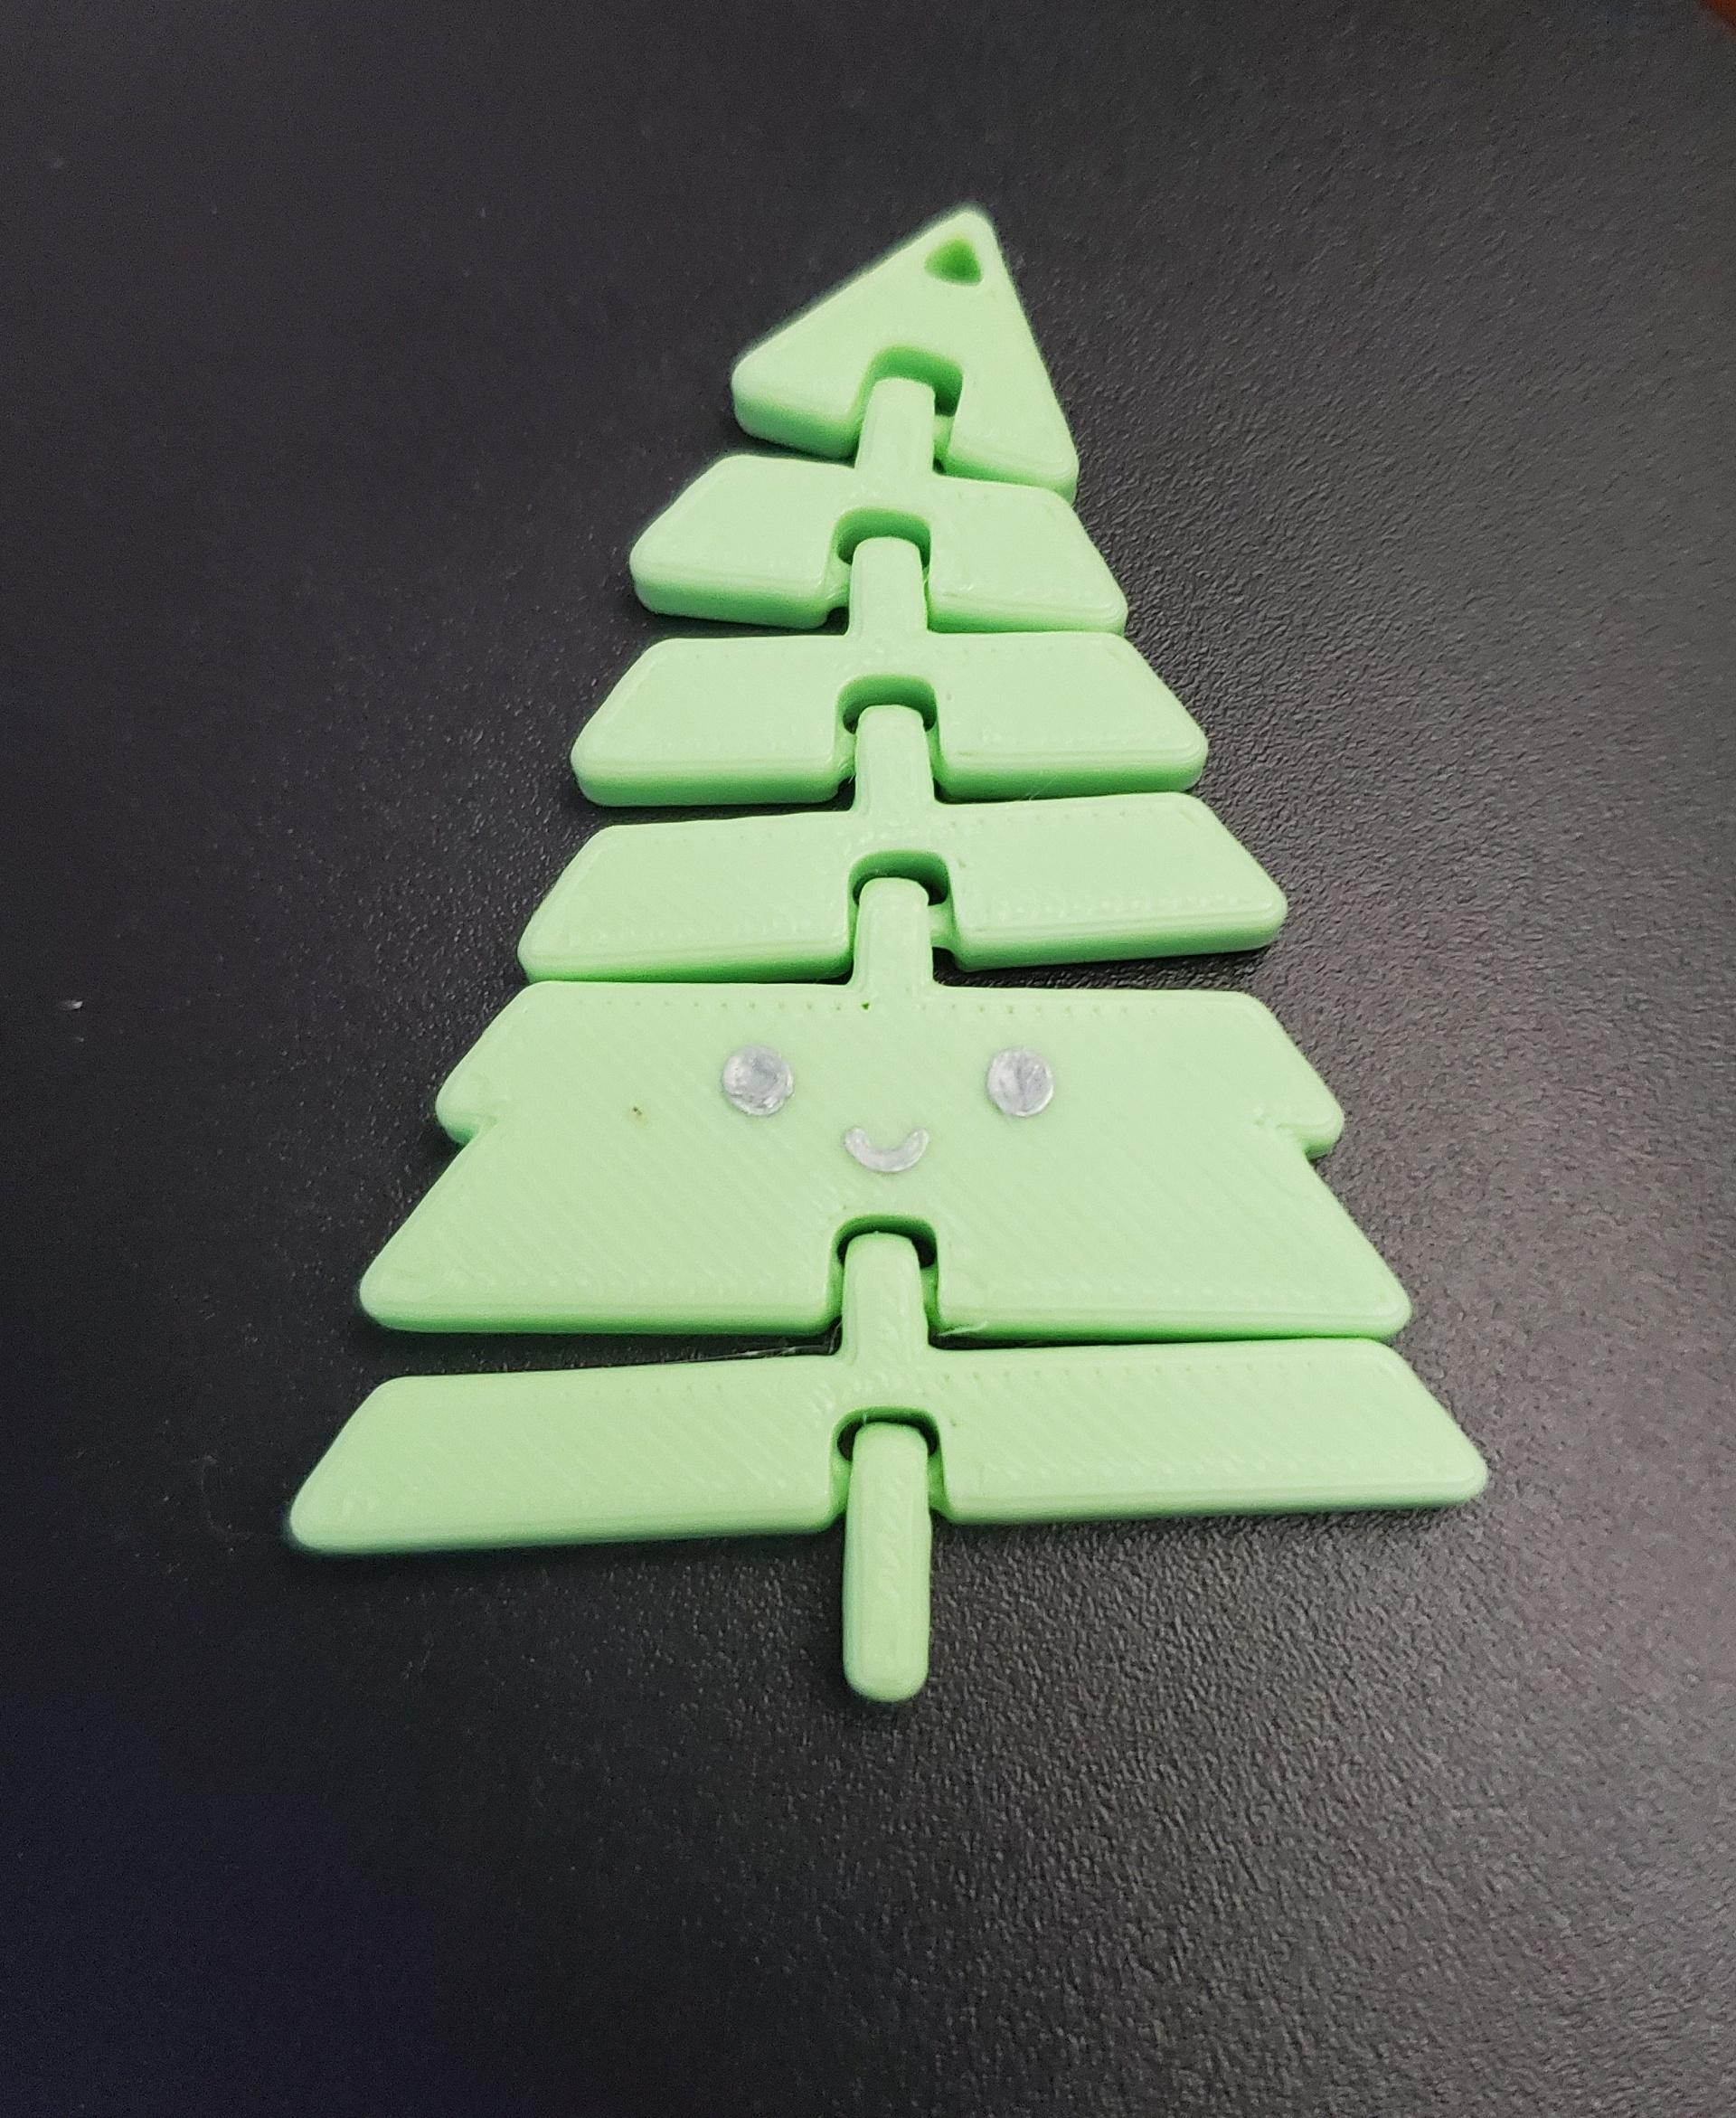 Articulated Kawaii Christmas Tree Keychain - Print in place fidget toy - 3mf - polymaker pla pro light green - 3d model